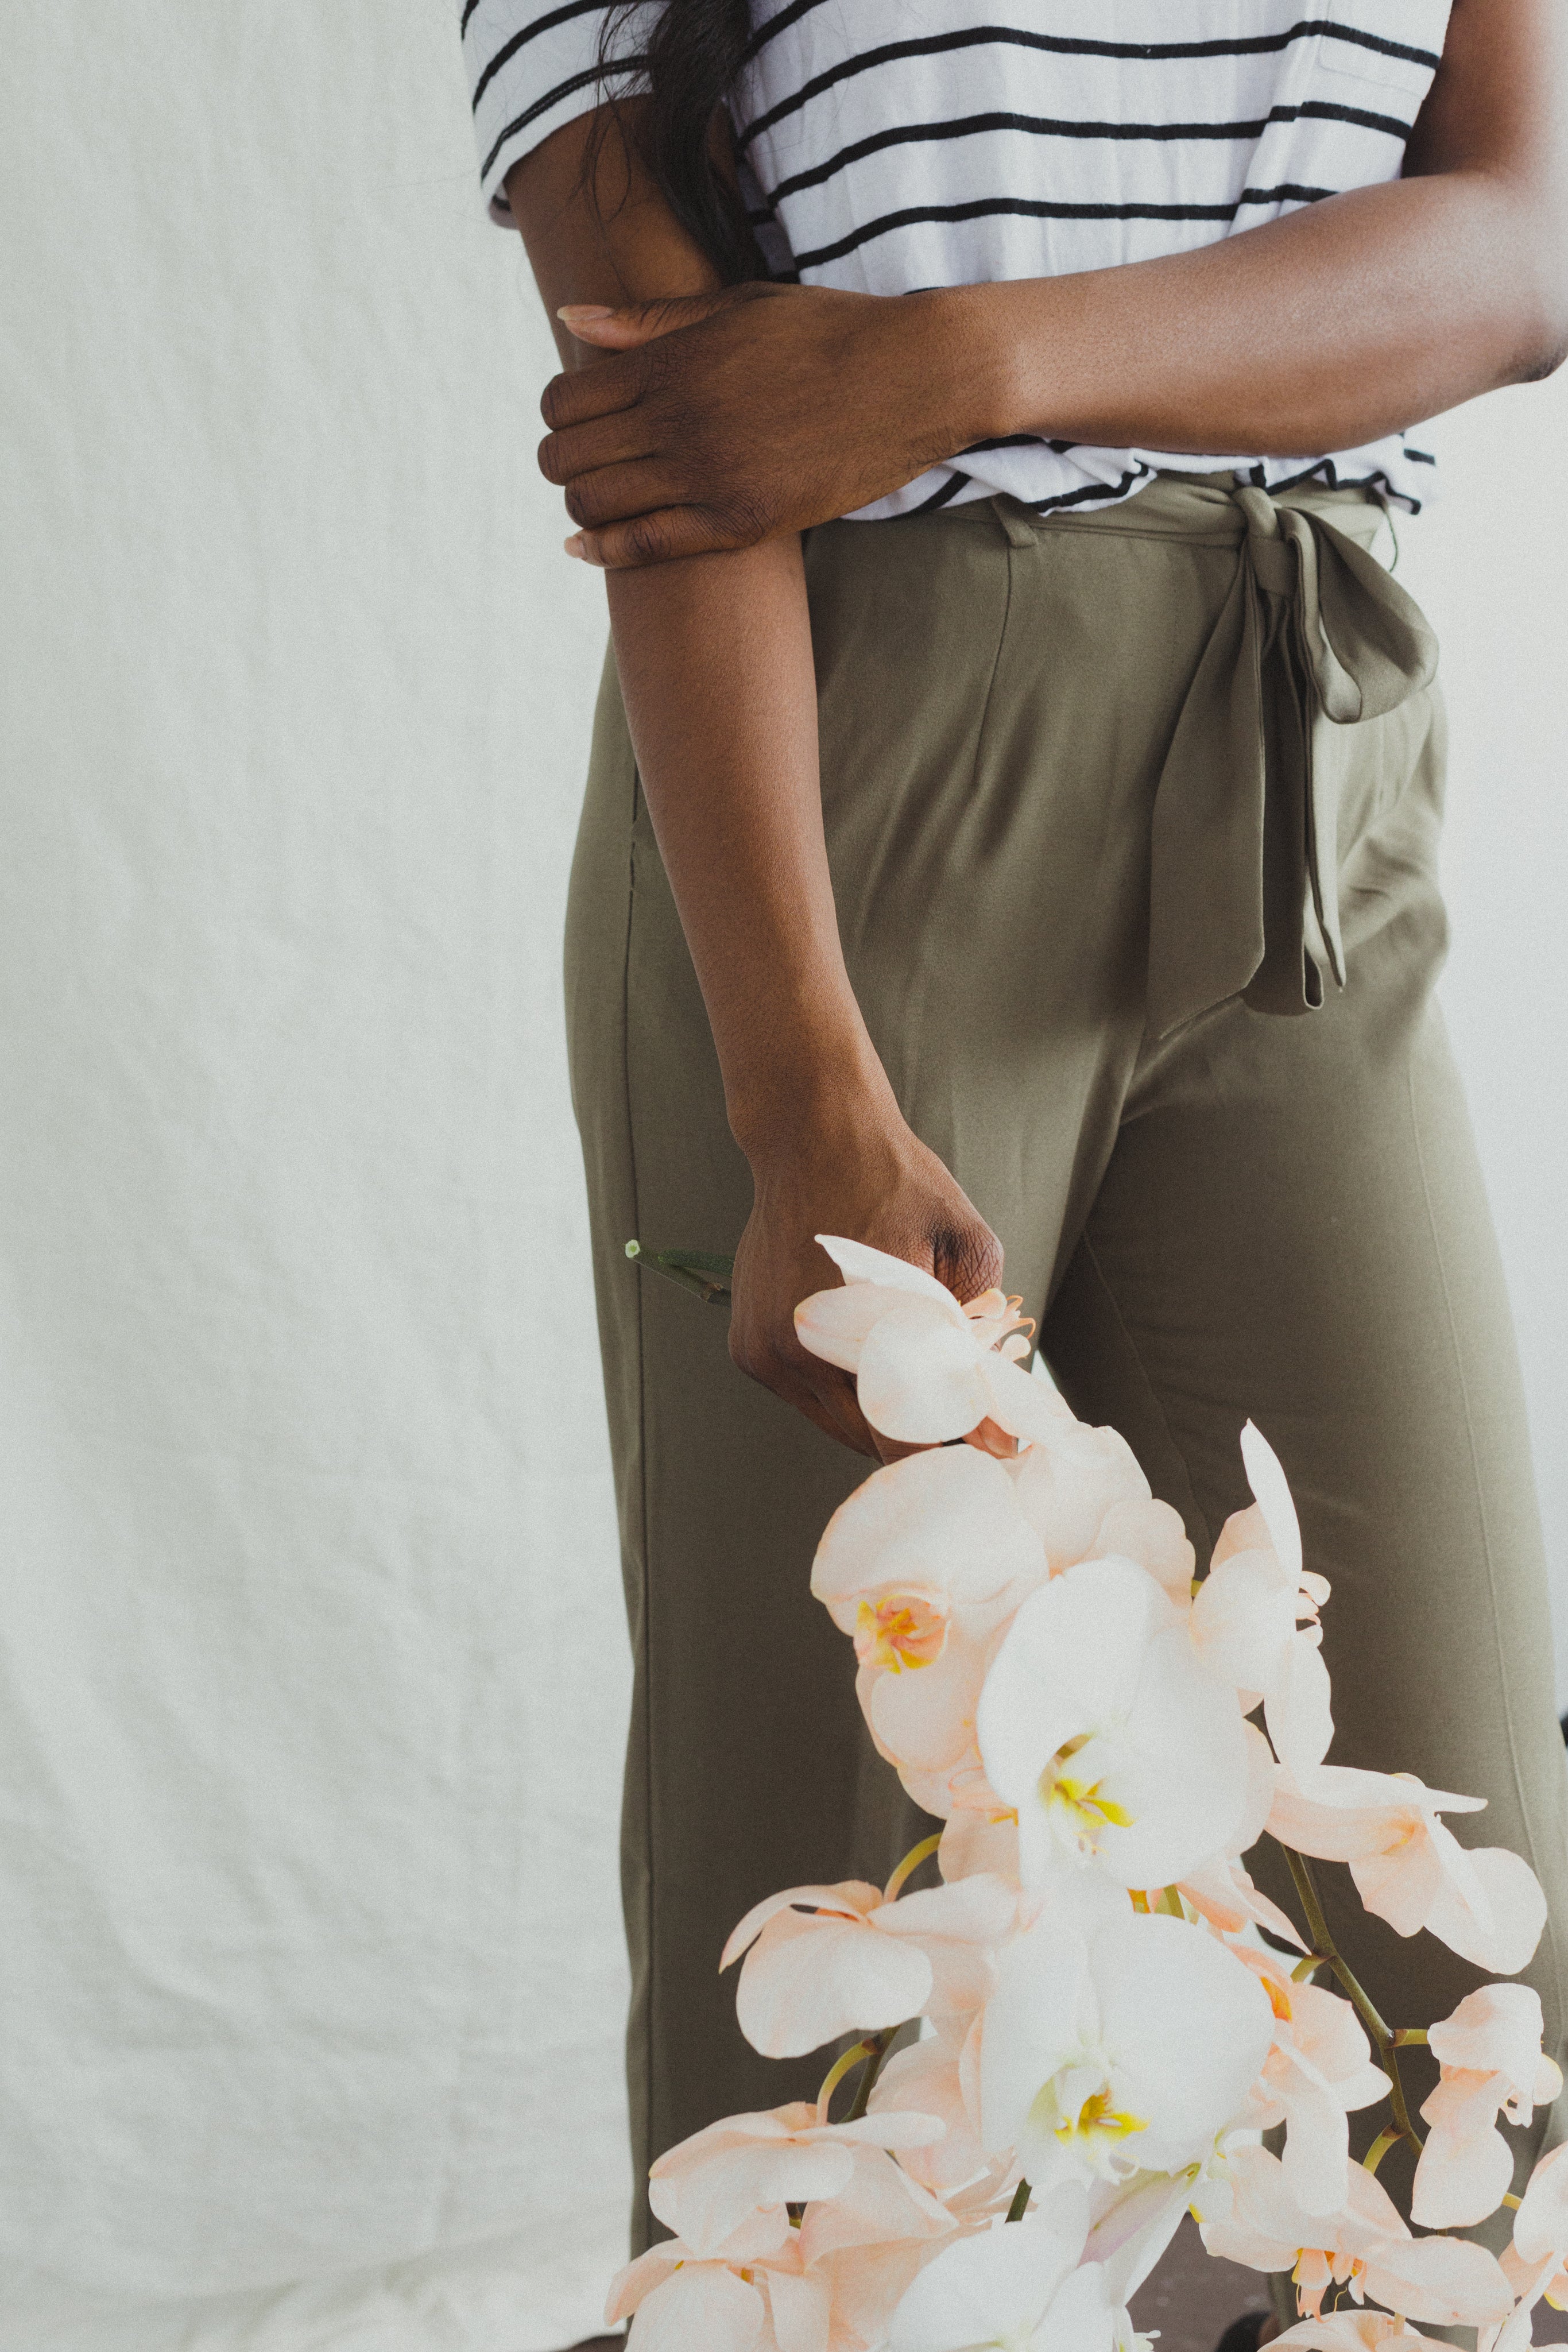 a-model-in-khakis-holding-orchids.jpg